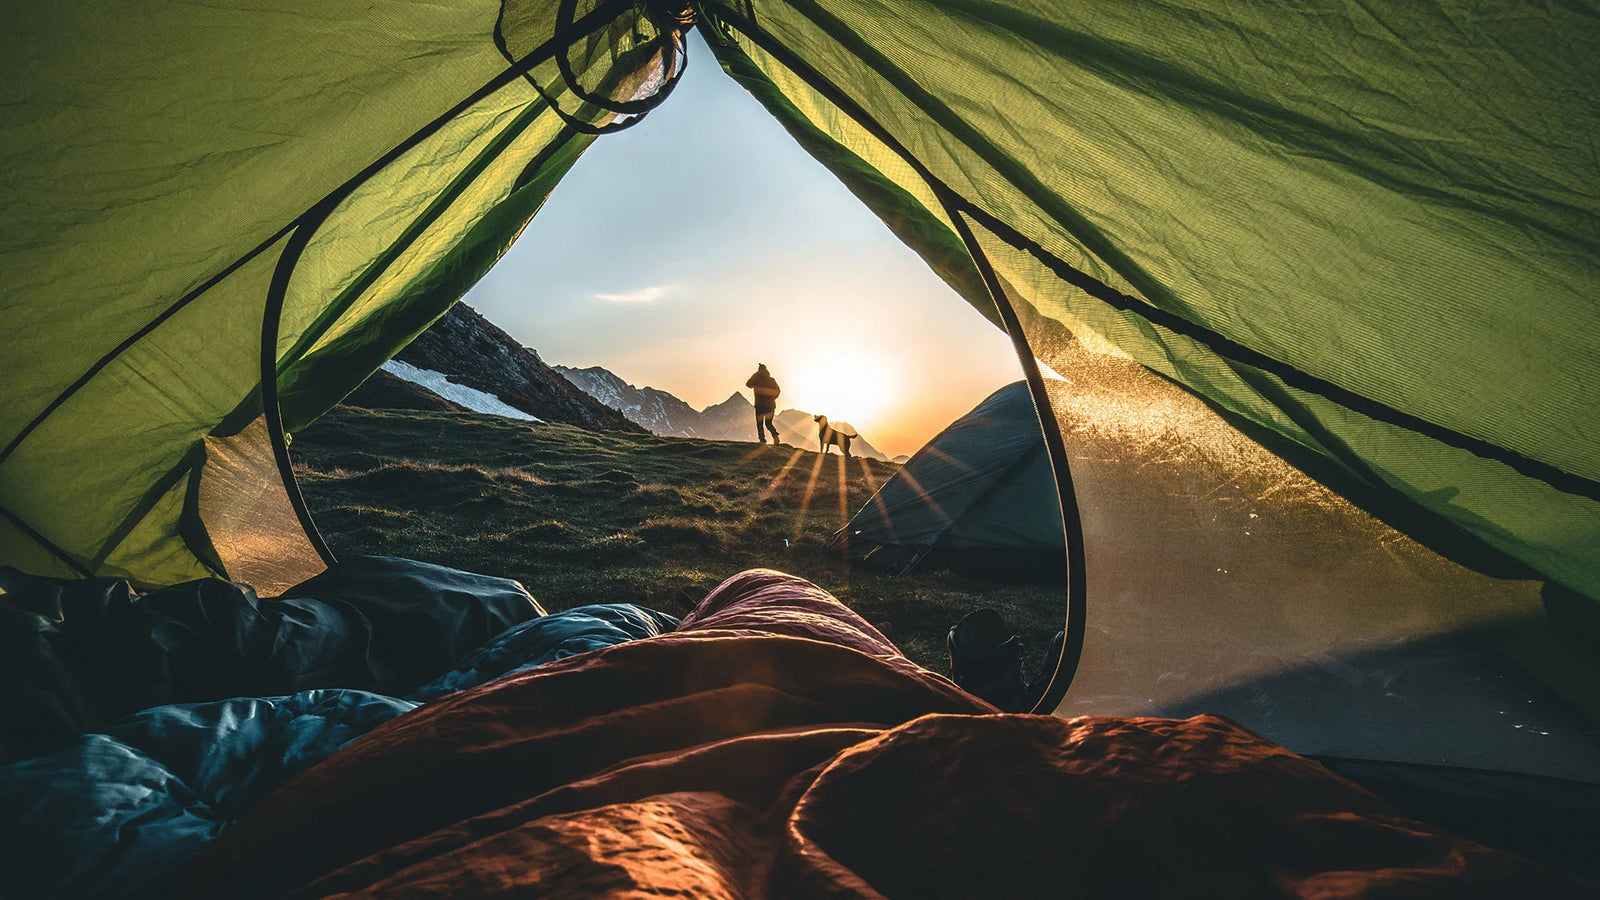 Morning view of a campsite from inside a tent